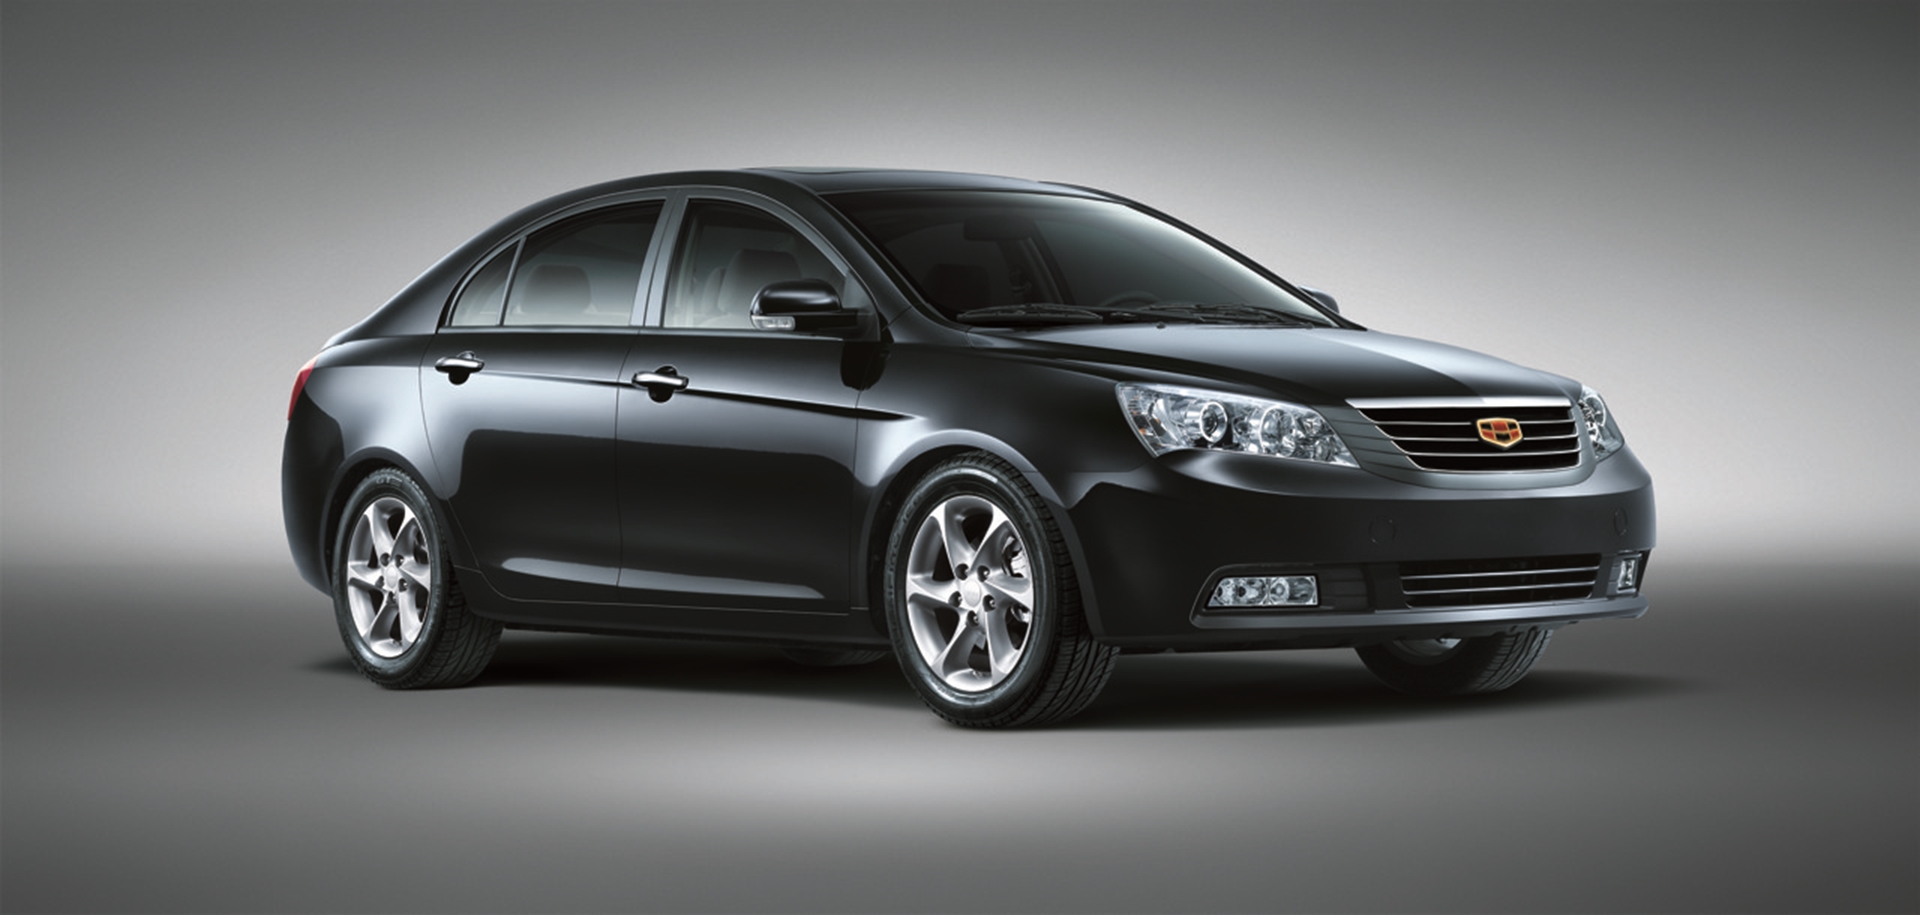 New Geely EC7 takes top spot in subcompact market